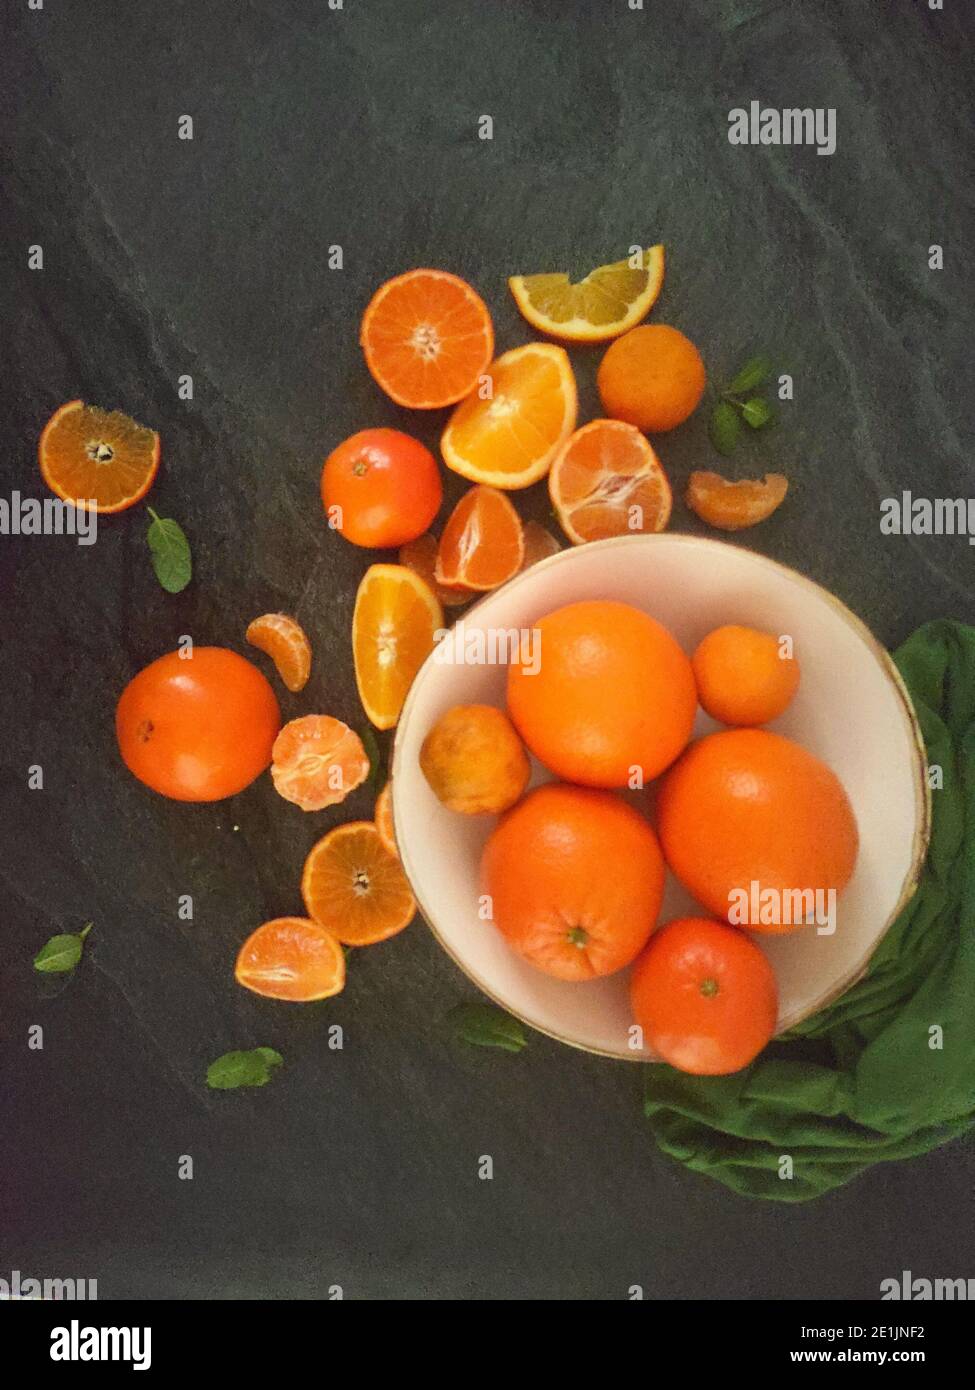 Whole and sliced oranges on a luxury dark background under the sunlight Stock Photo